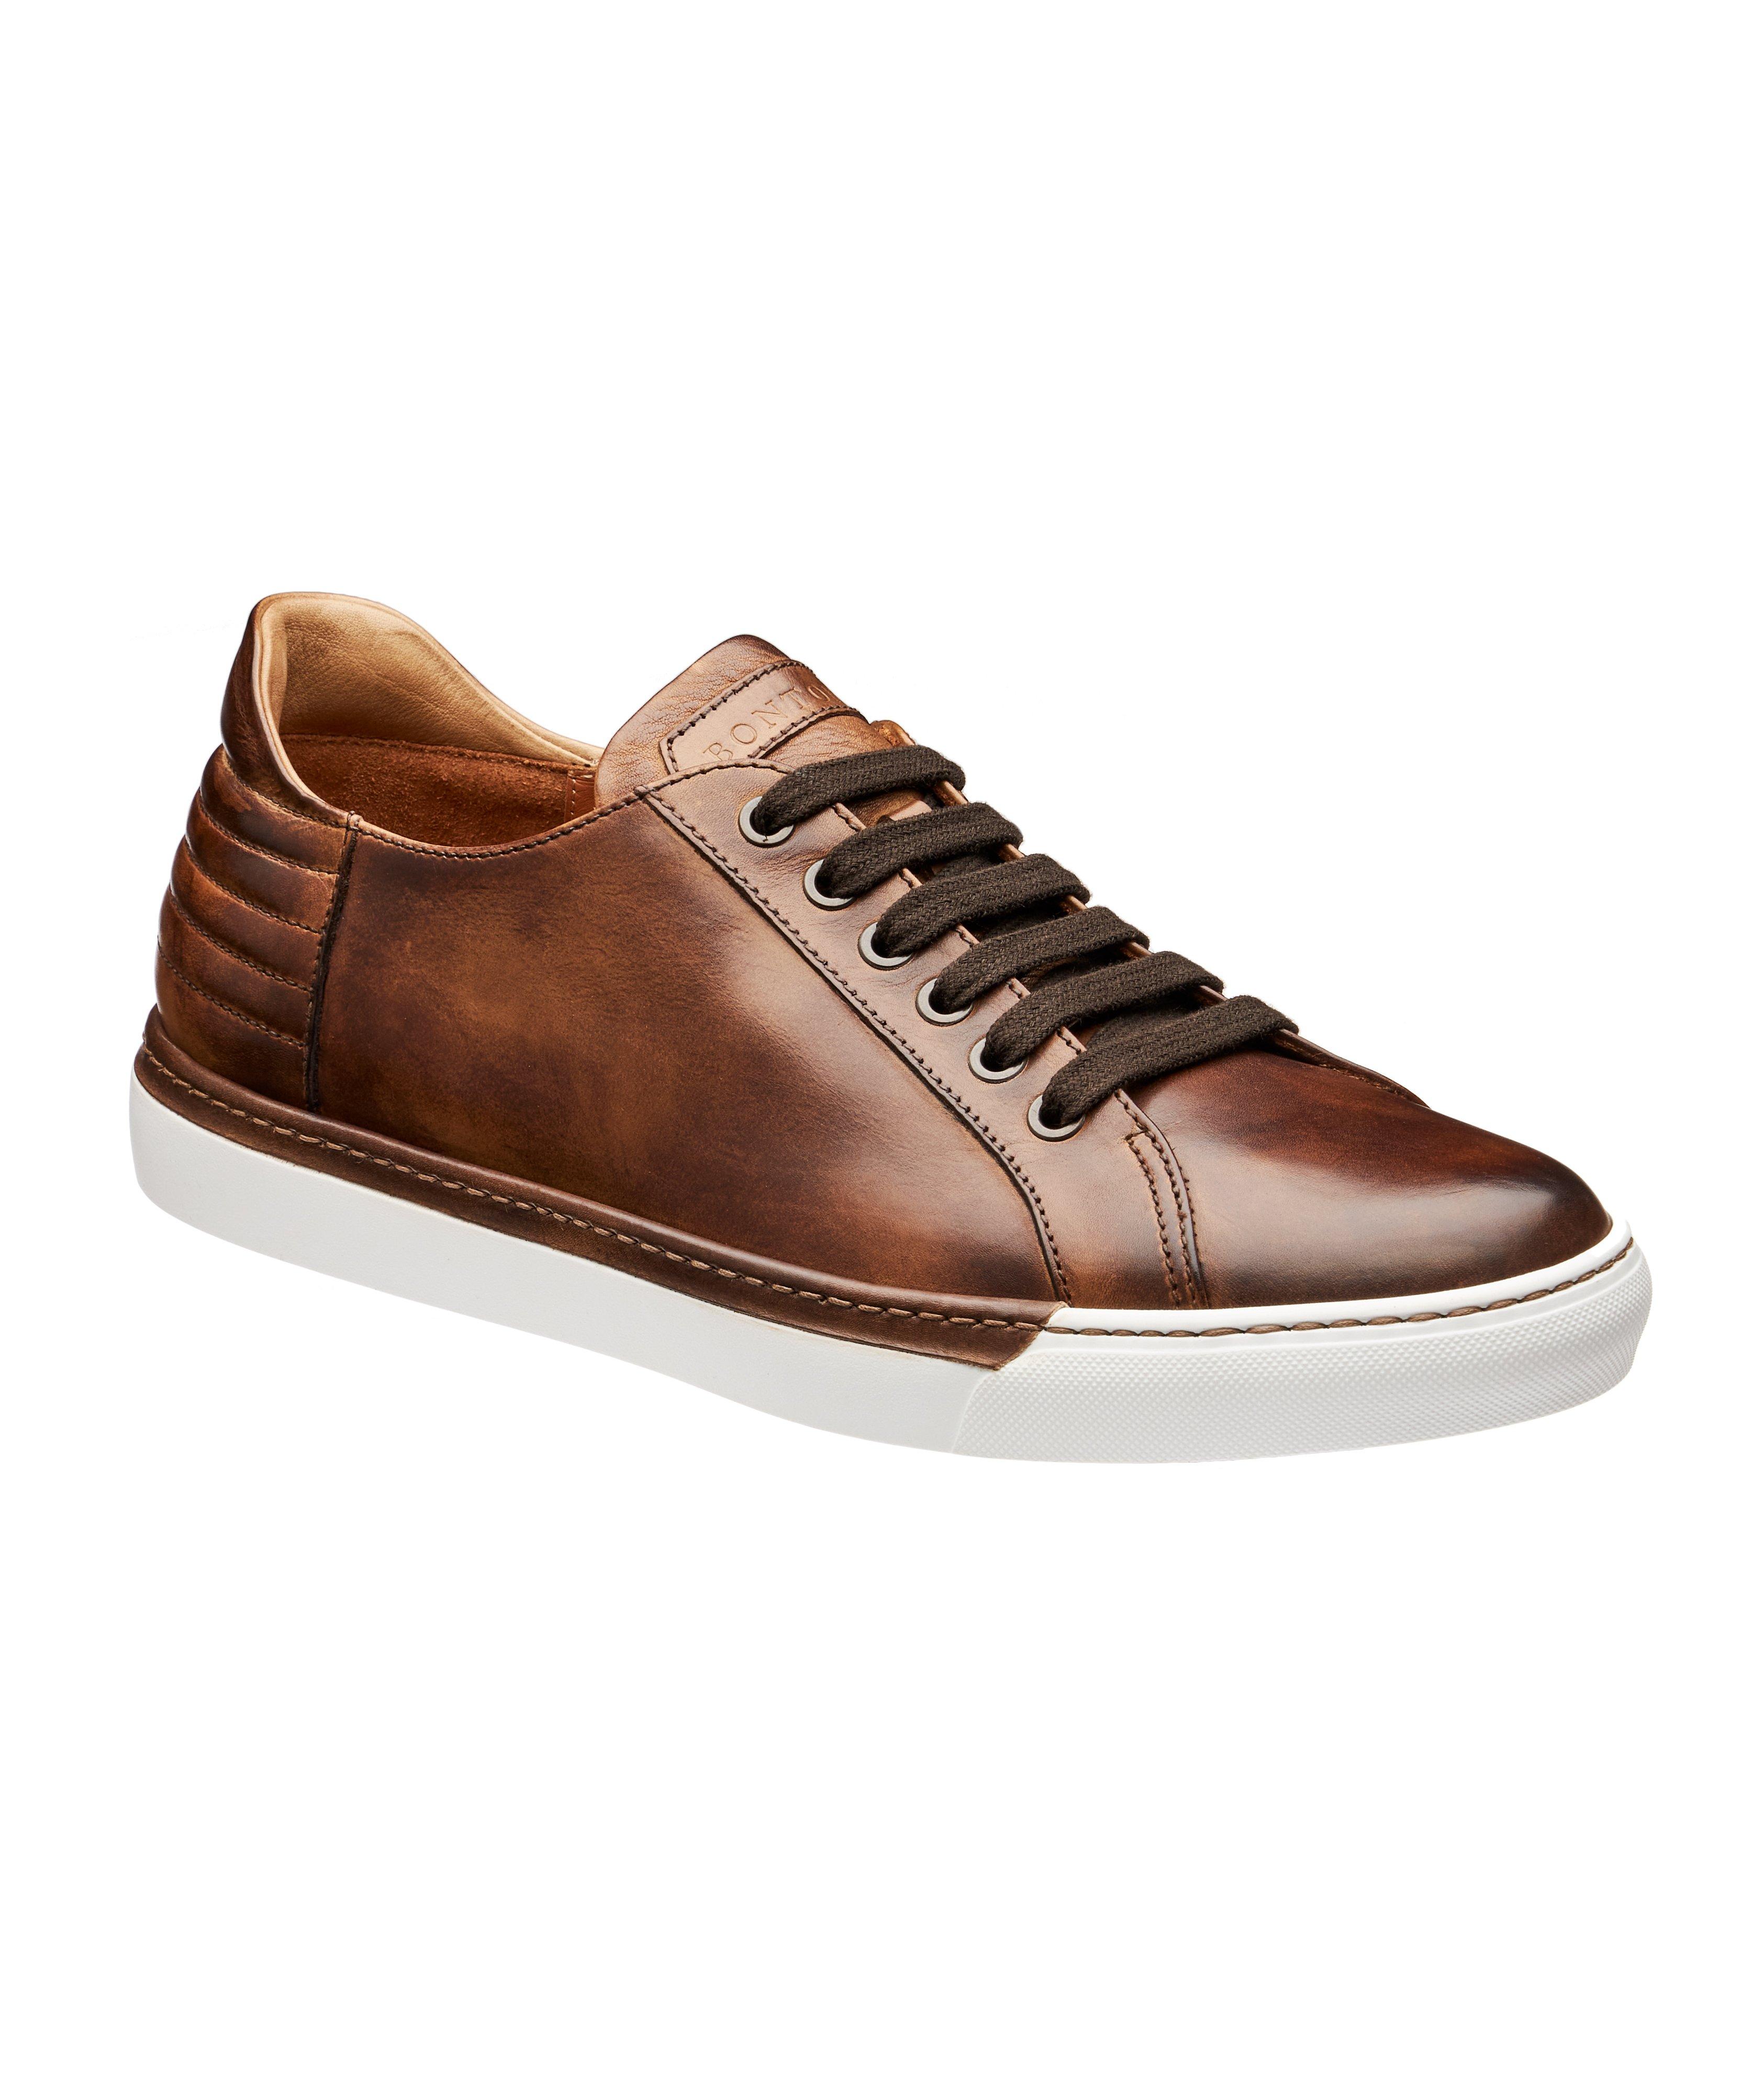 Burnished Leather Sneakers image 0